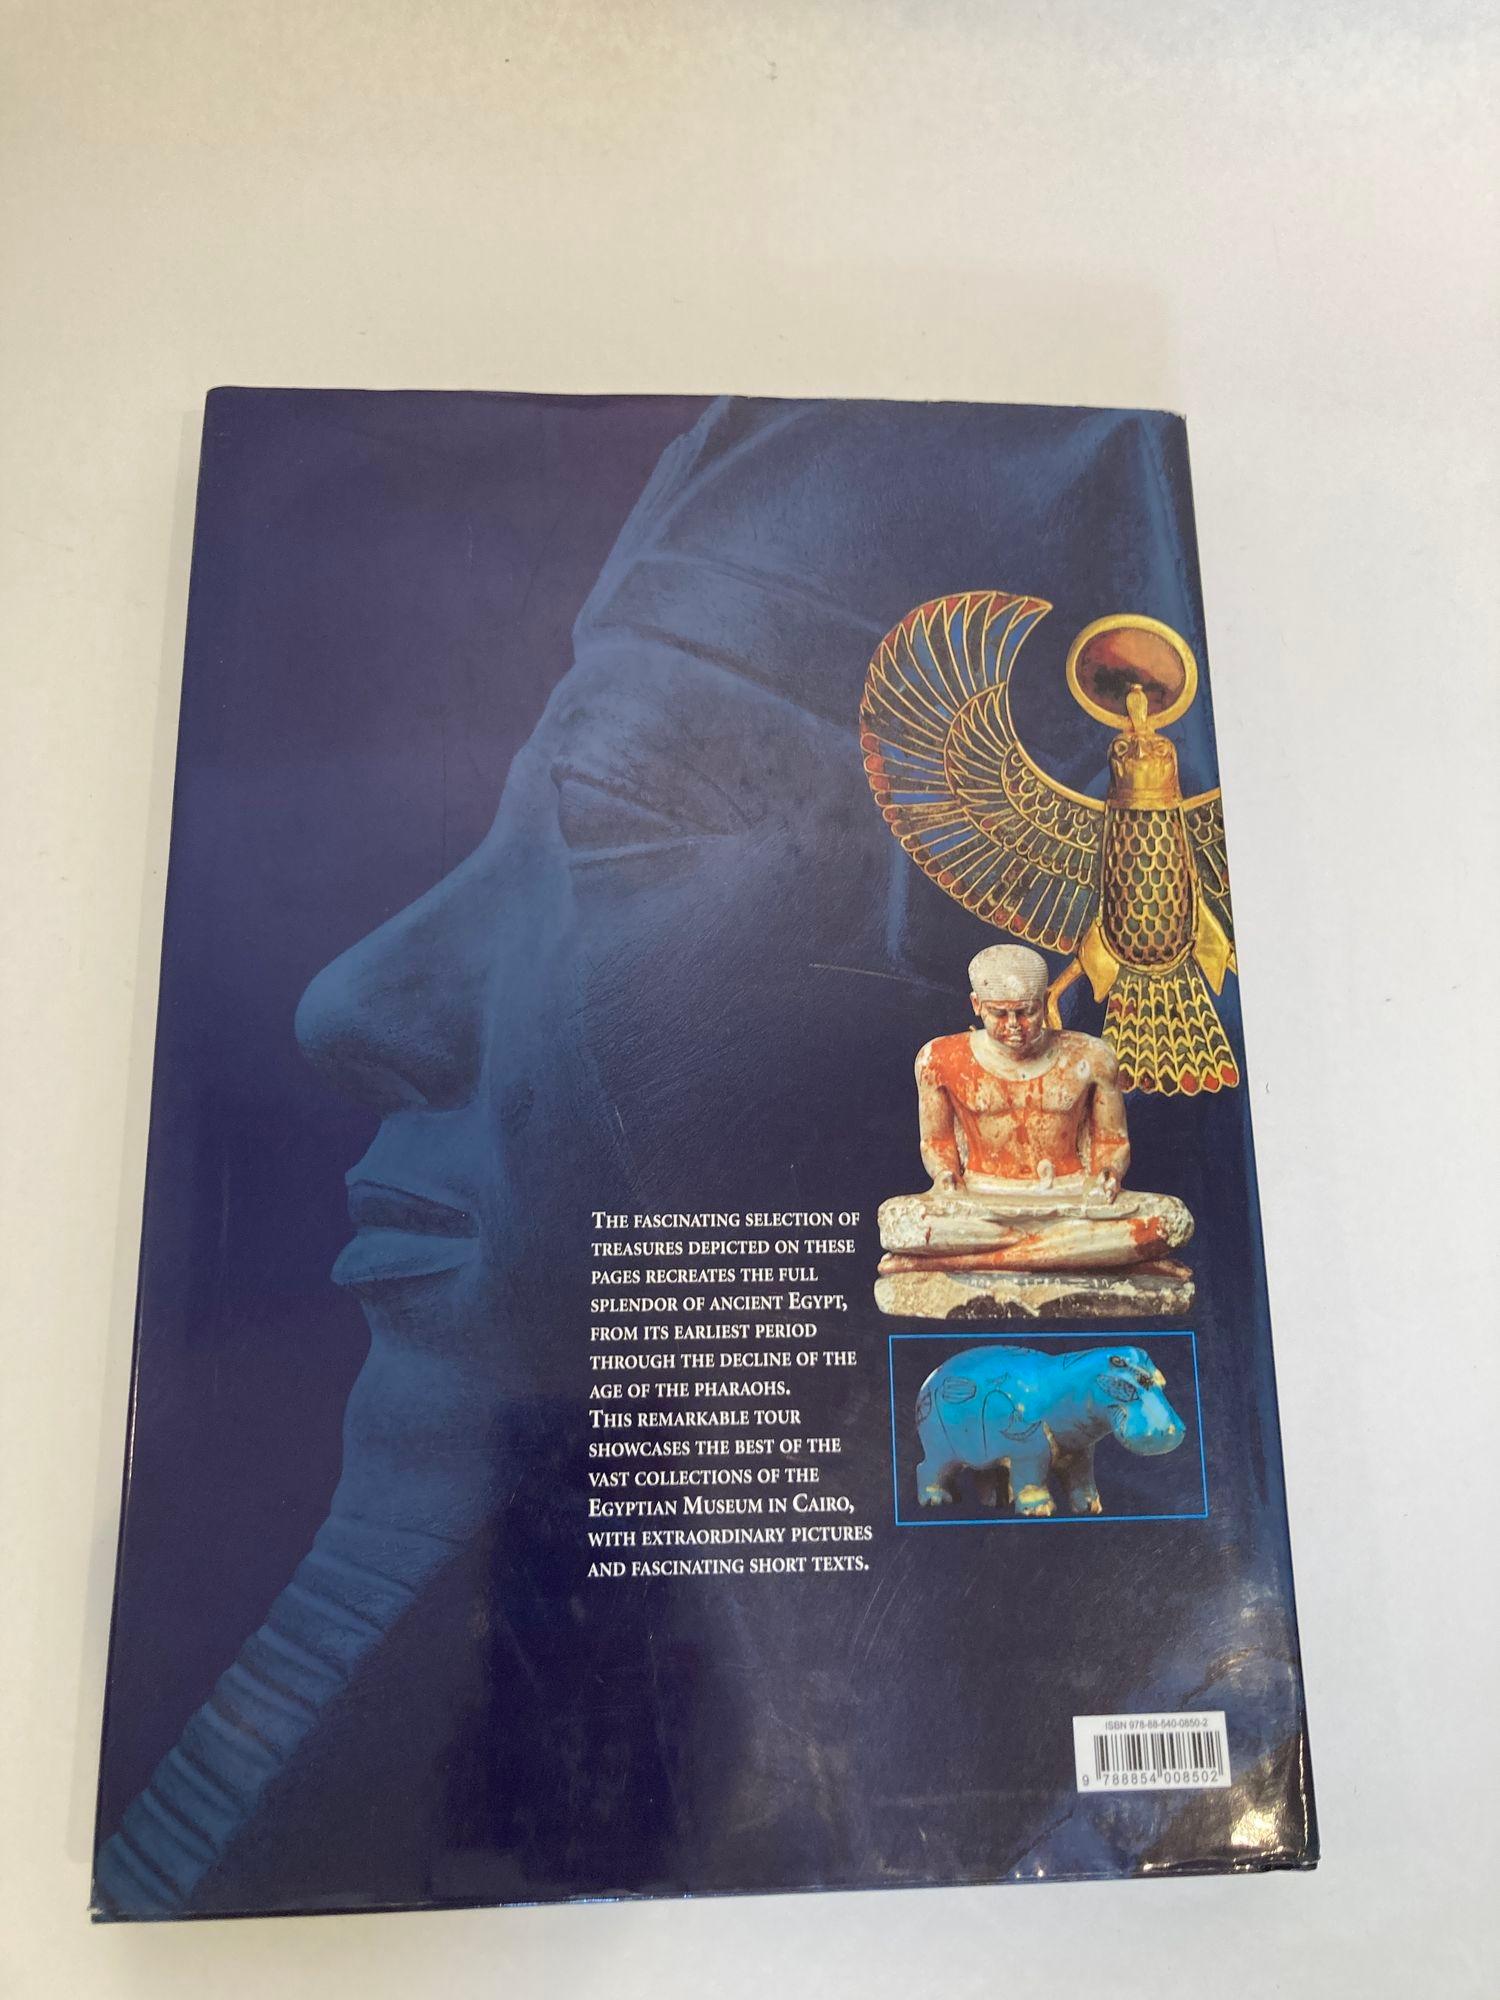 20th Century Treasures of Tutankhamun and the Egyptian Museum in Cairo Hardcover Book For Sale